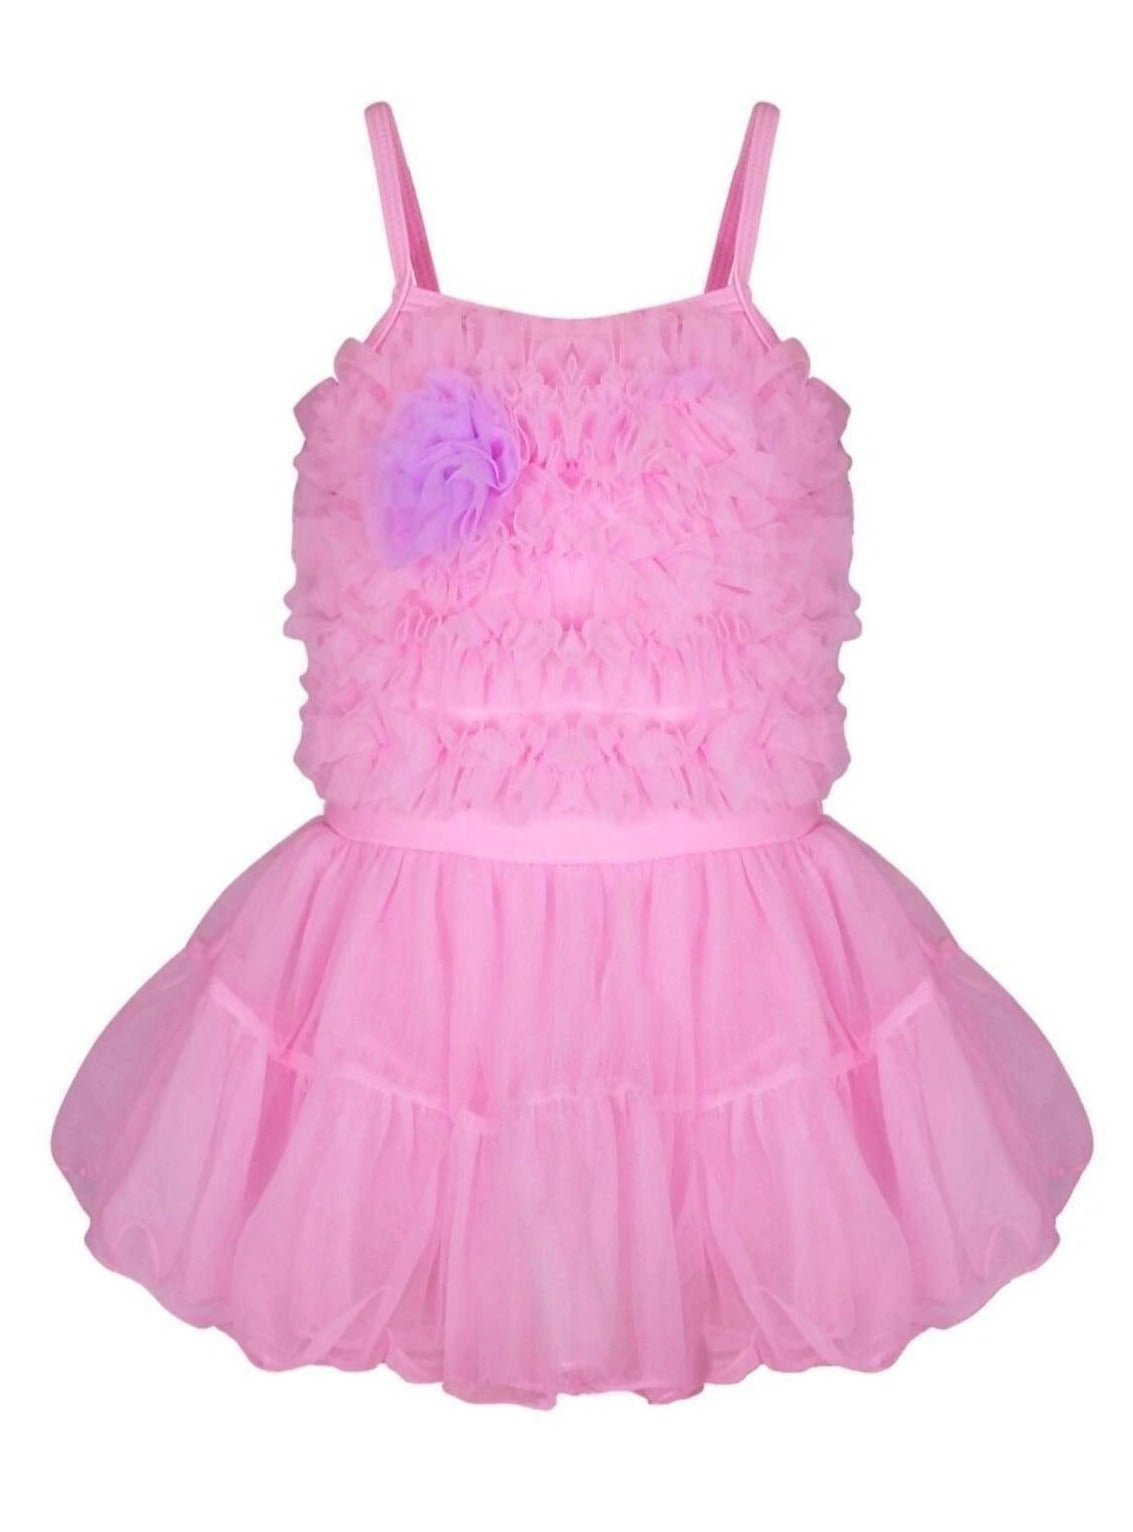 Girls Mesh Ruffled One-Piece Swimsuit with Flower Applique - Mia Belle ...